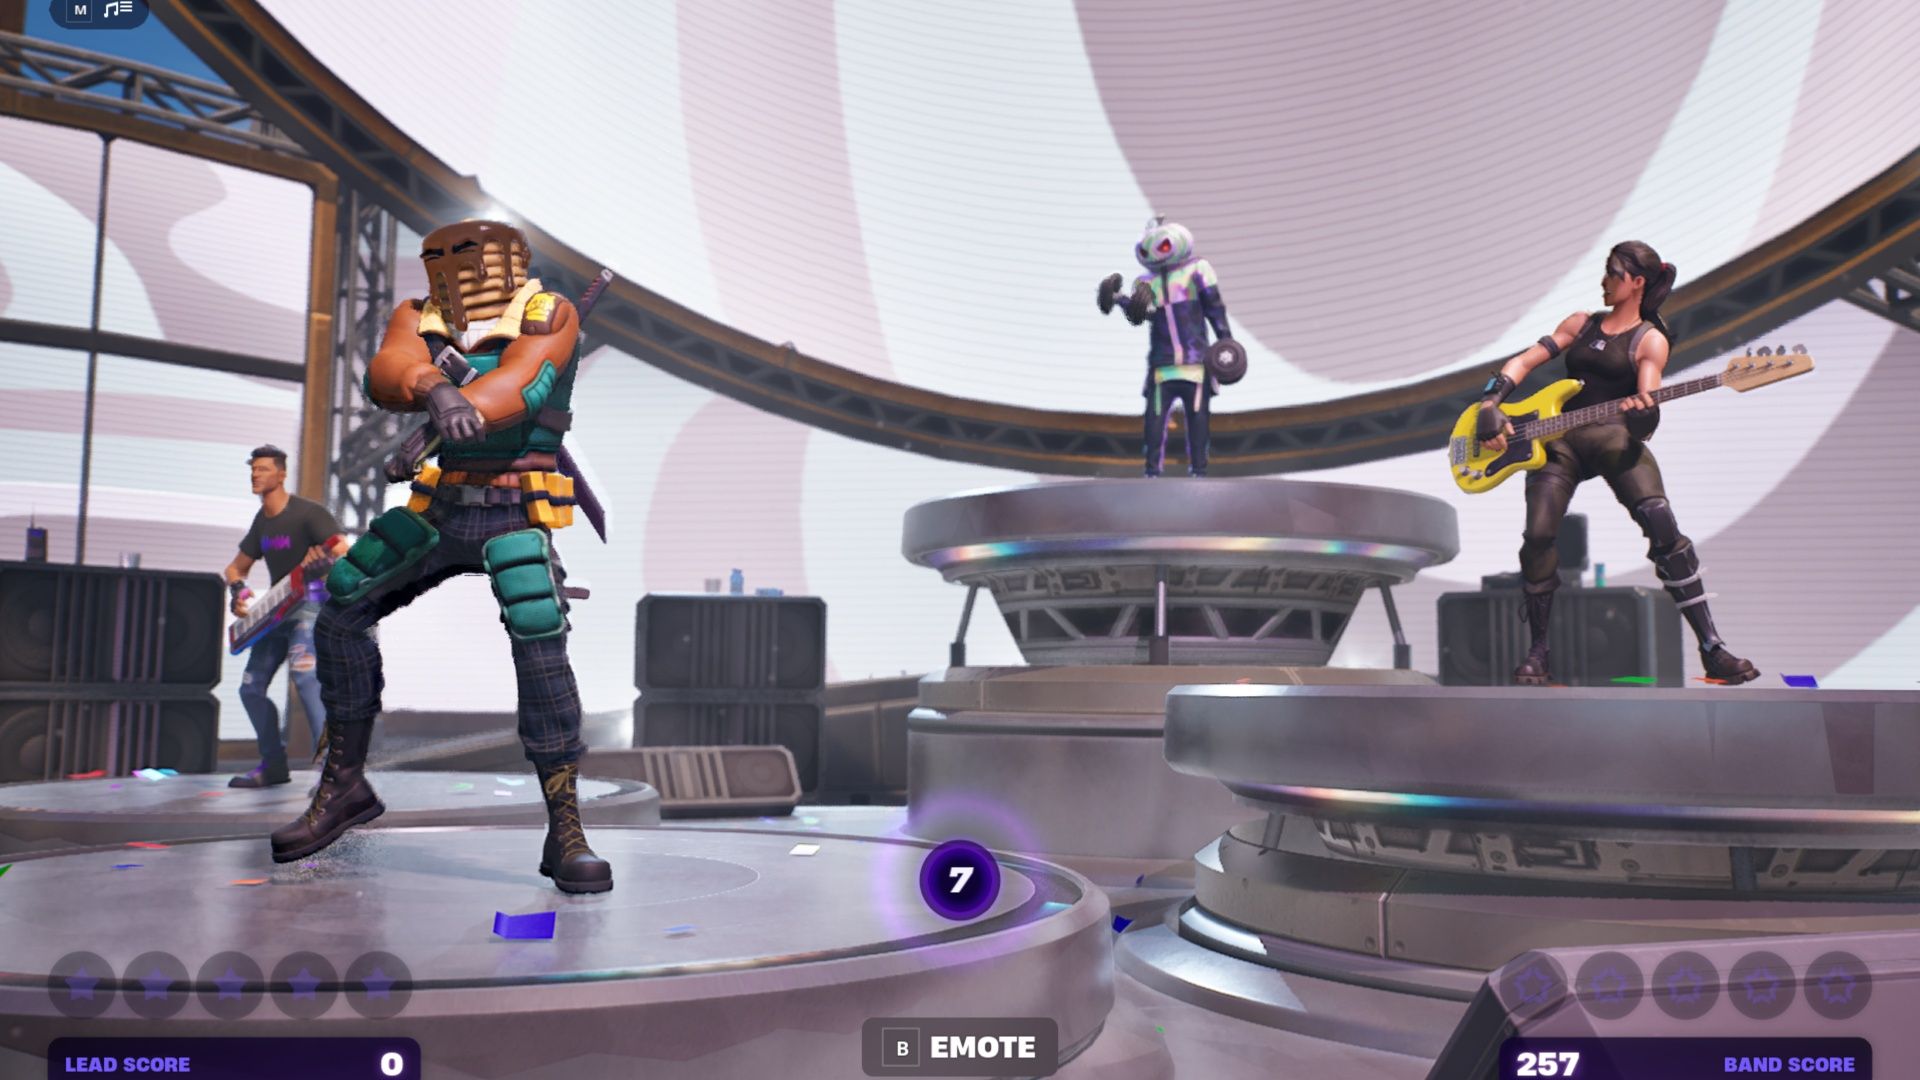 The band standing around and dancing while they prepare to join in on a song in Fortnite Festival.